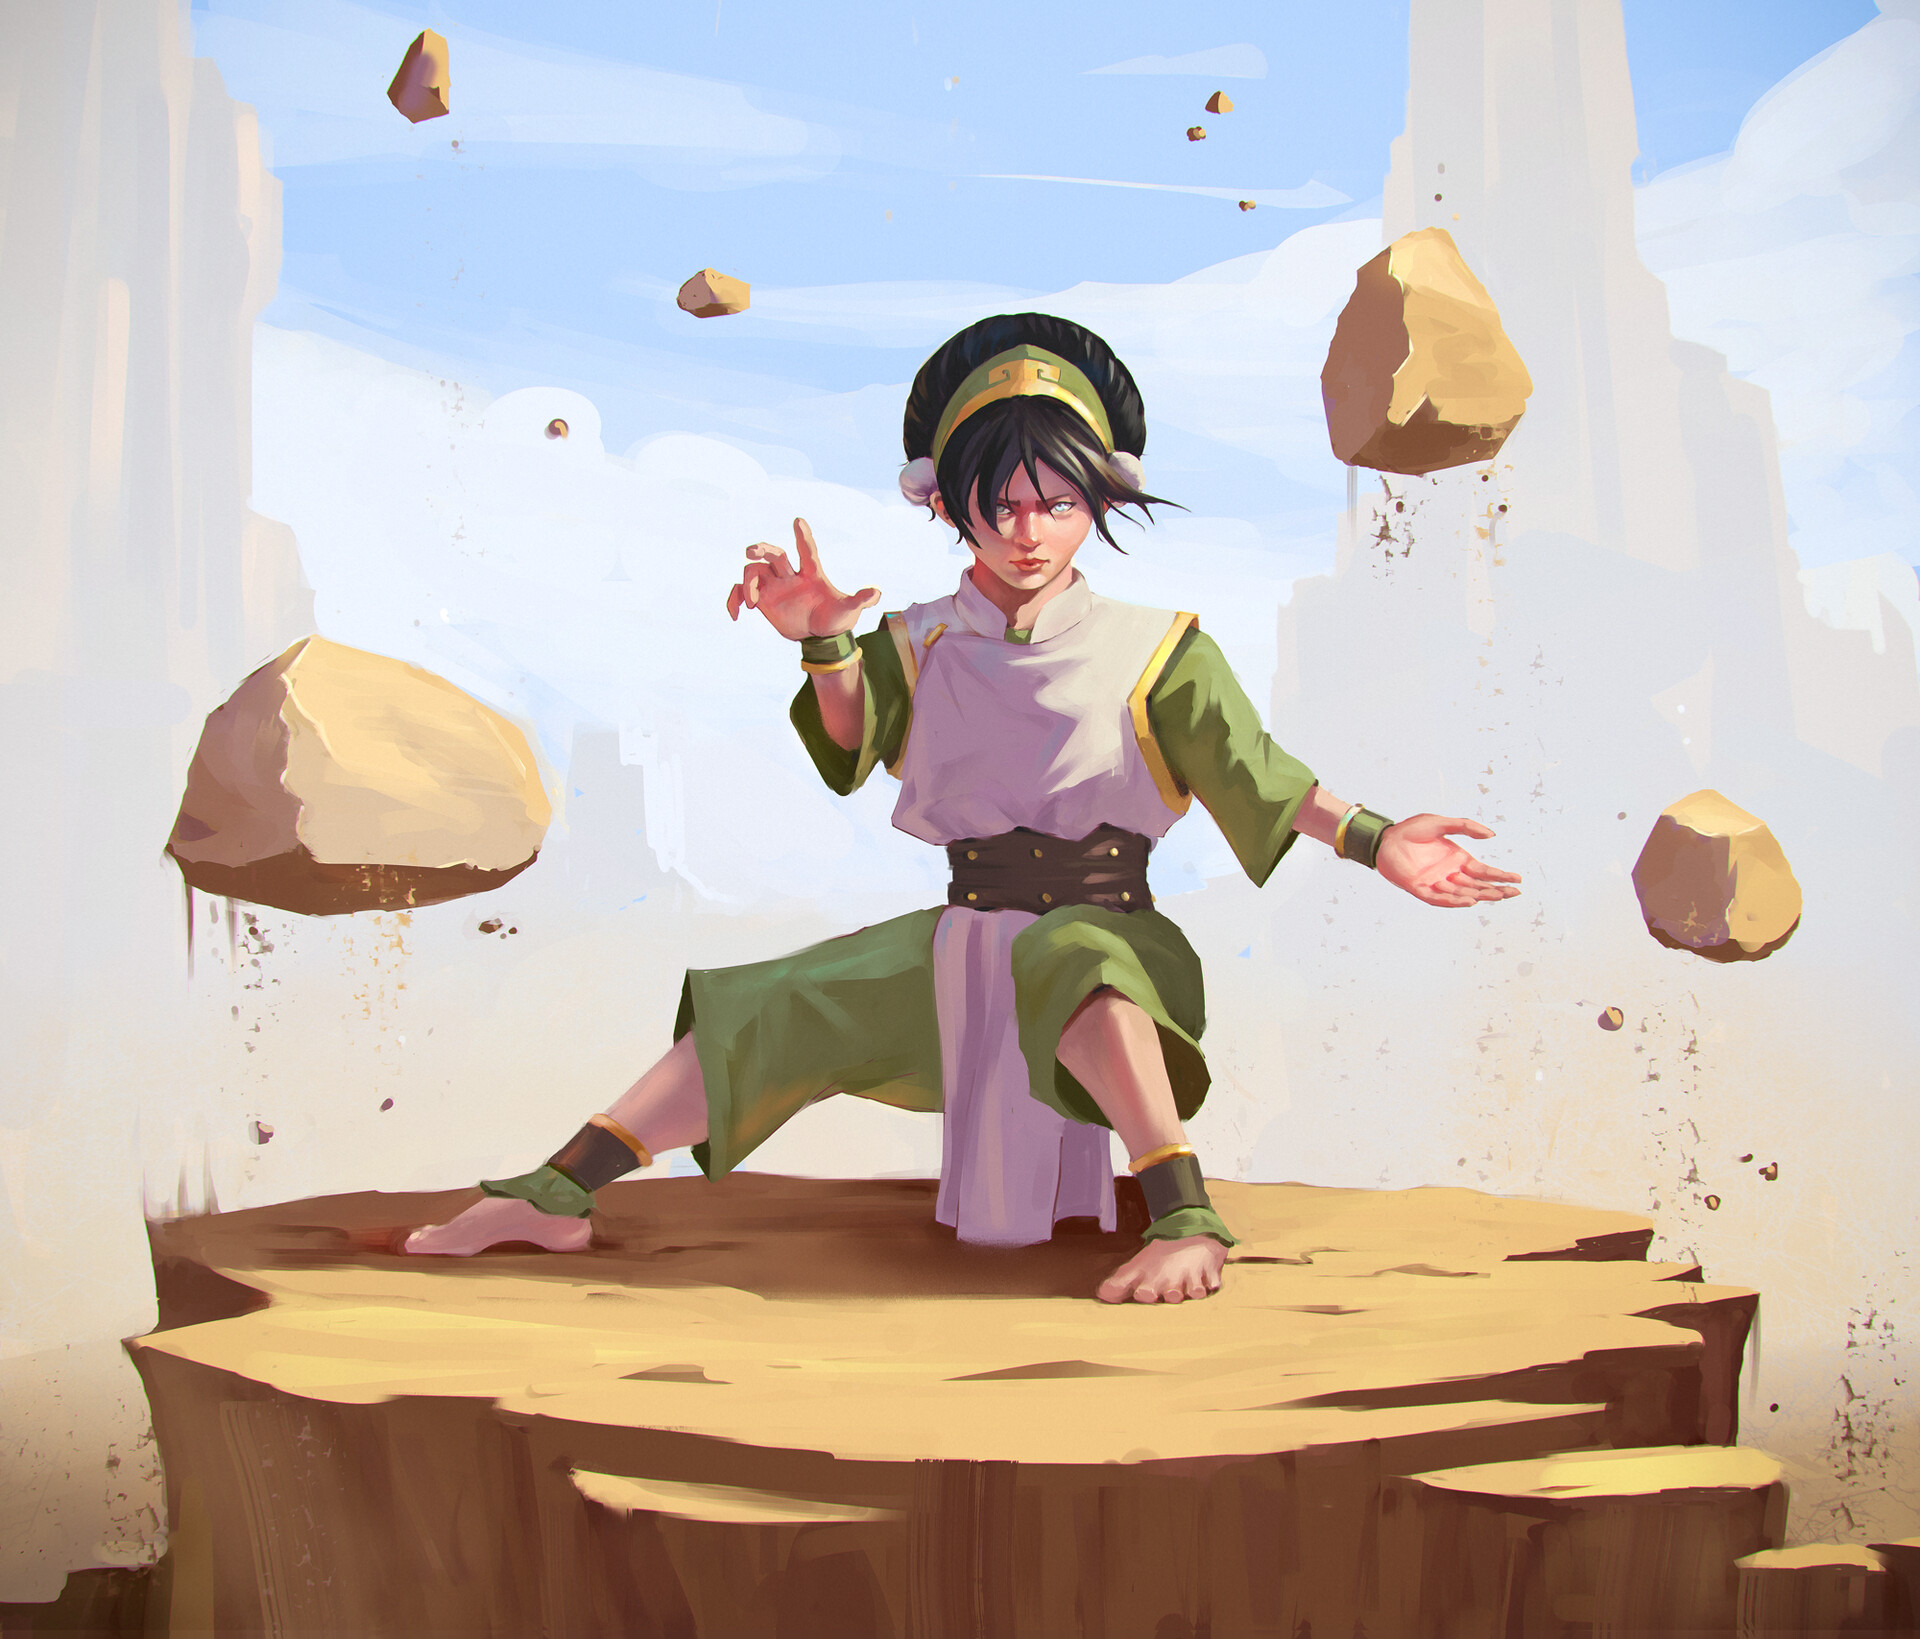 Toph Beifong the Earthbender.